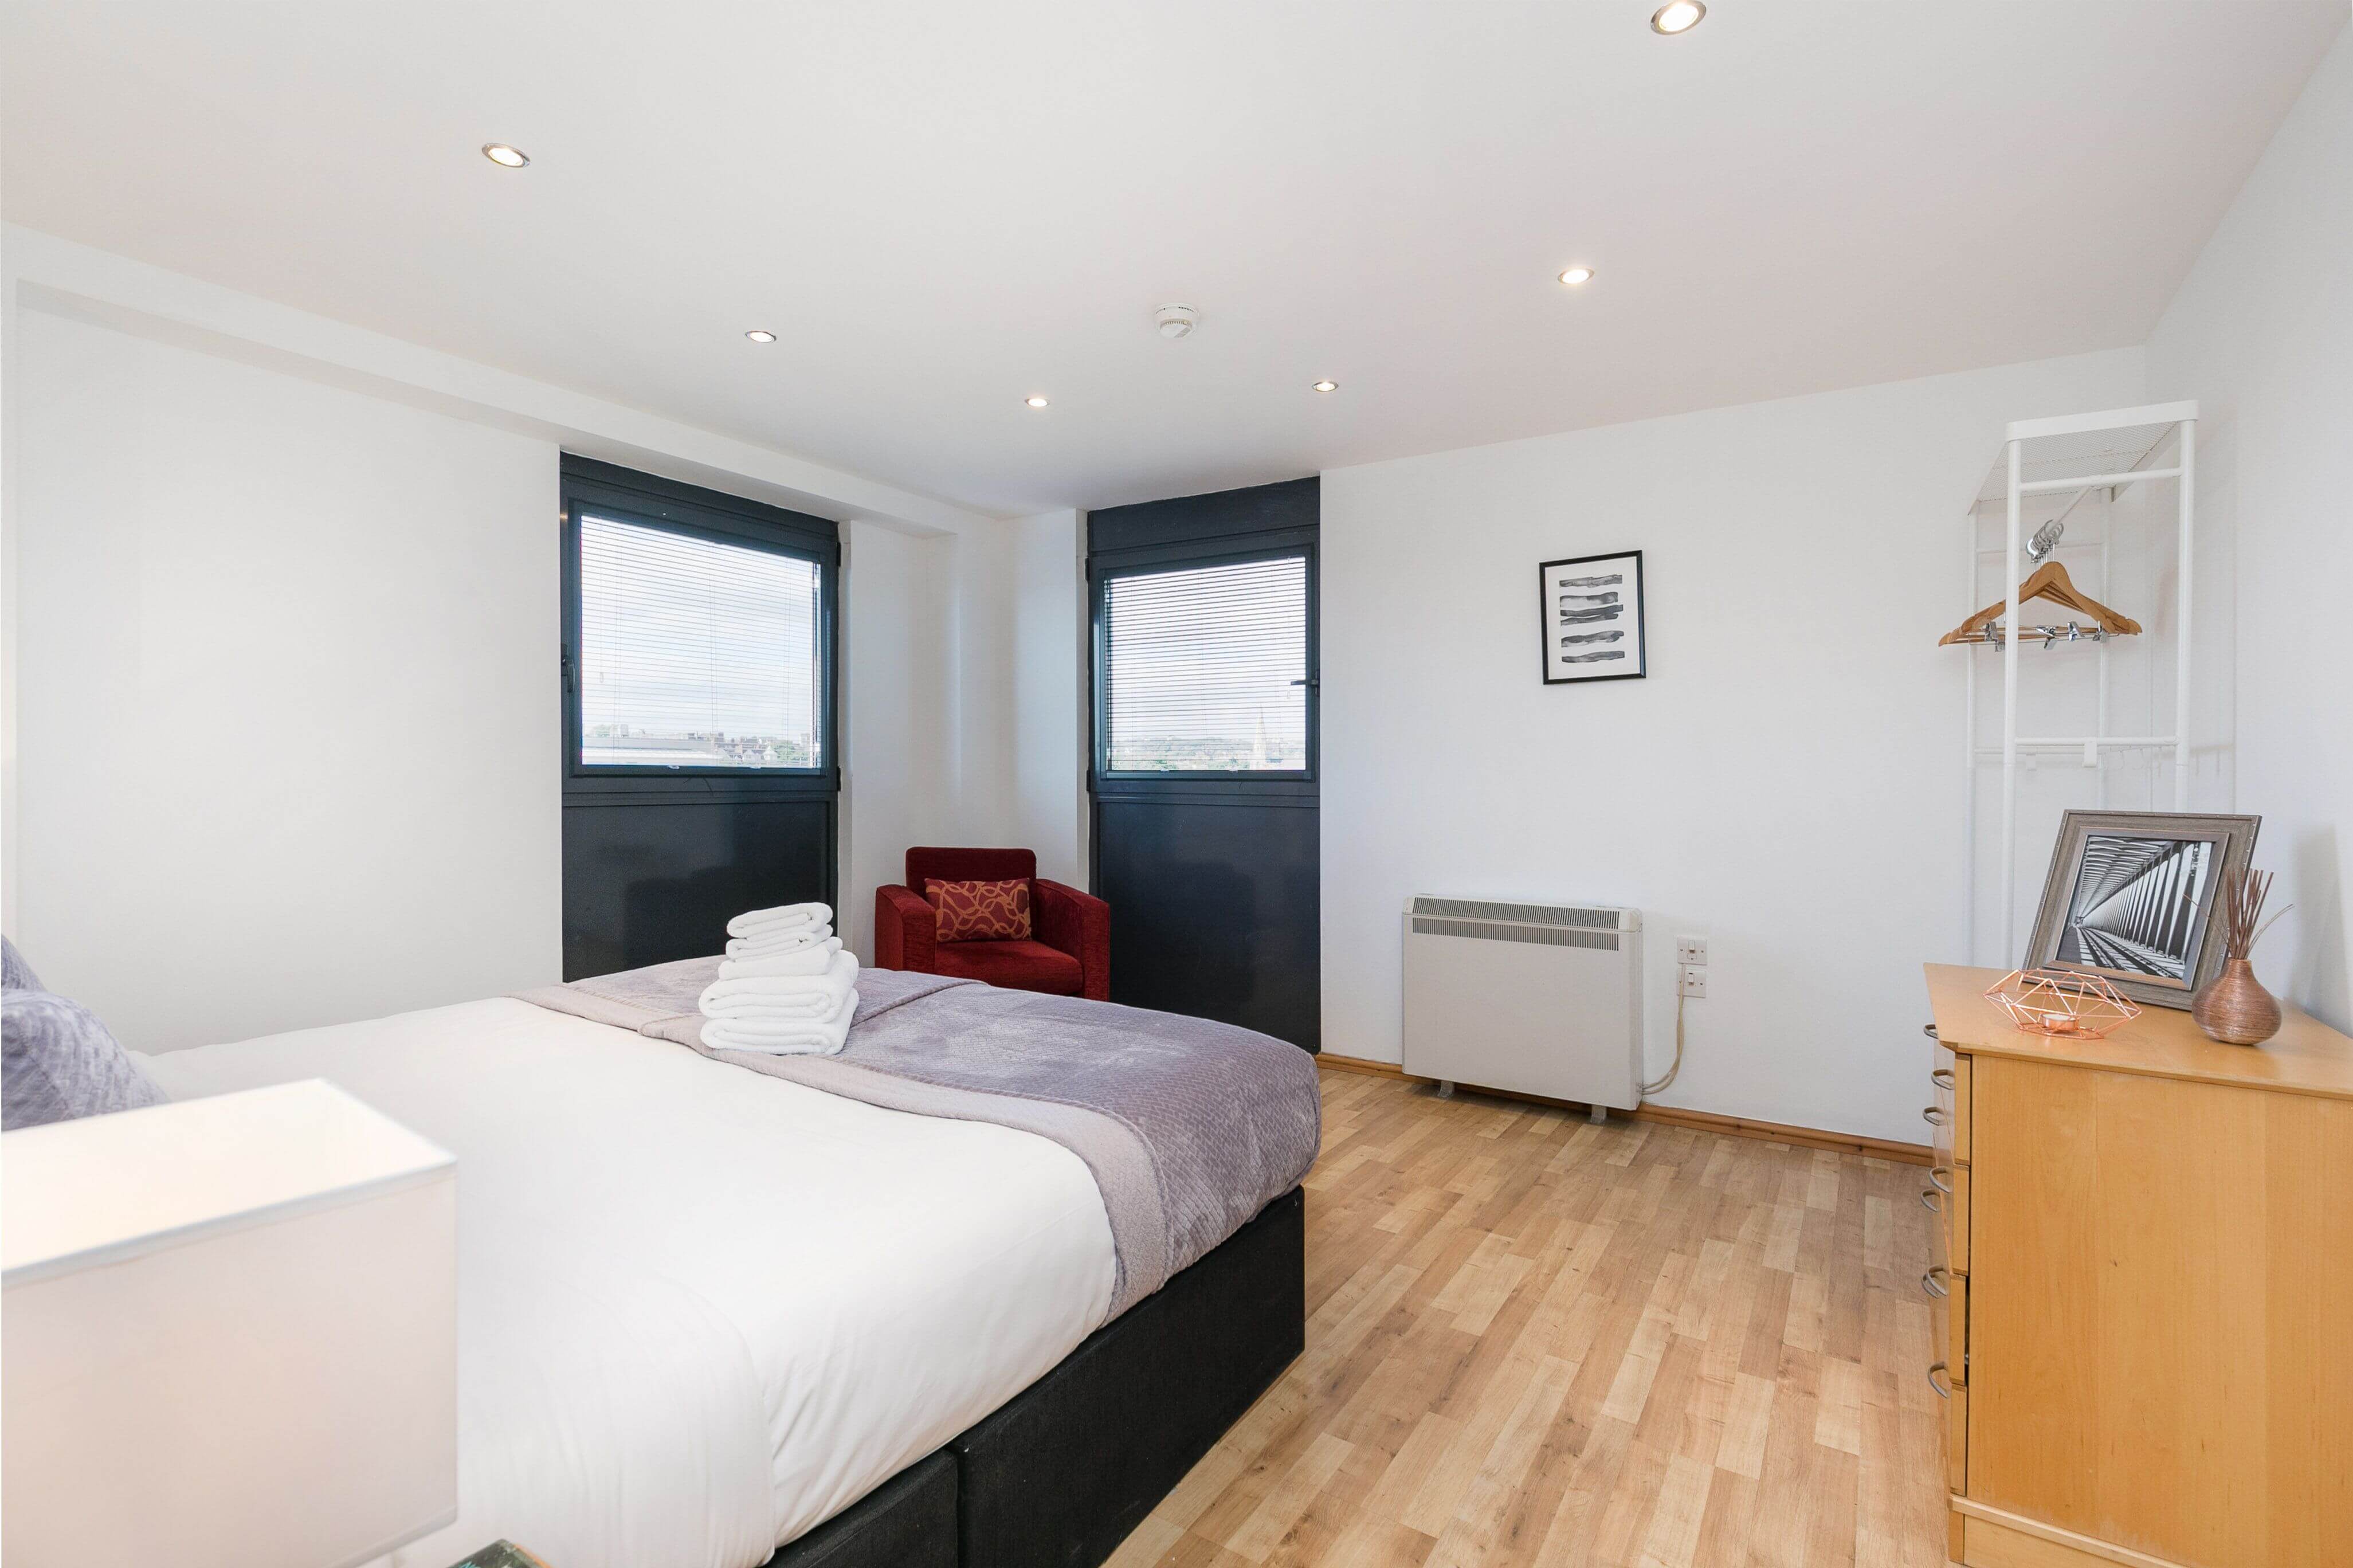 Serviced-Apartments-Maida-Vale,-London---Maida-Vale-Aparthotel-I-Free-Wifi-and-Weekly-Housekeeping,-BOOK-NOW-+44-208-691-3920-for-the-Best-Discounted-Rates!